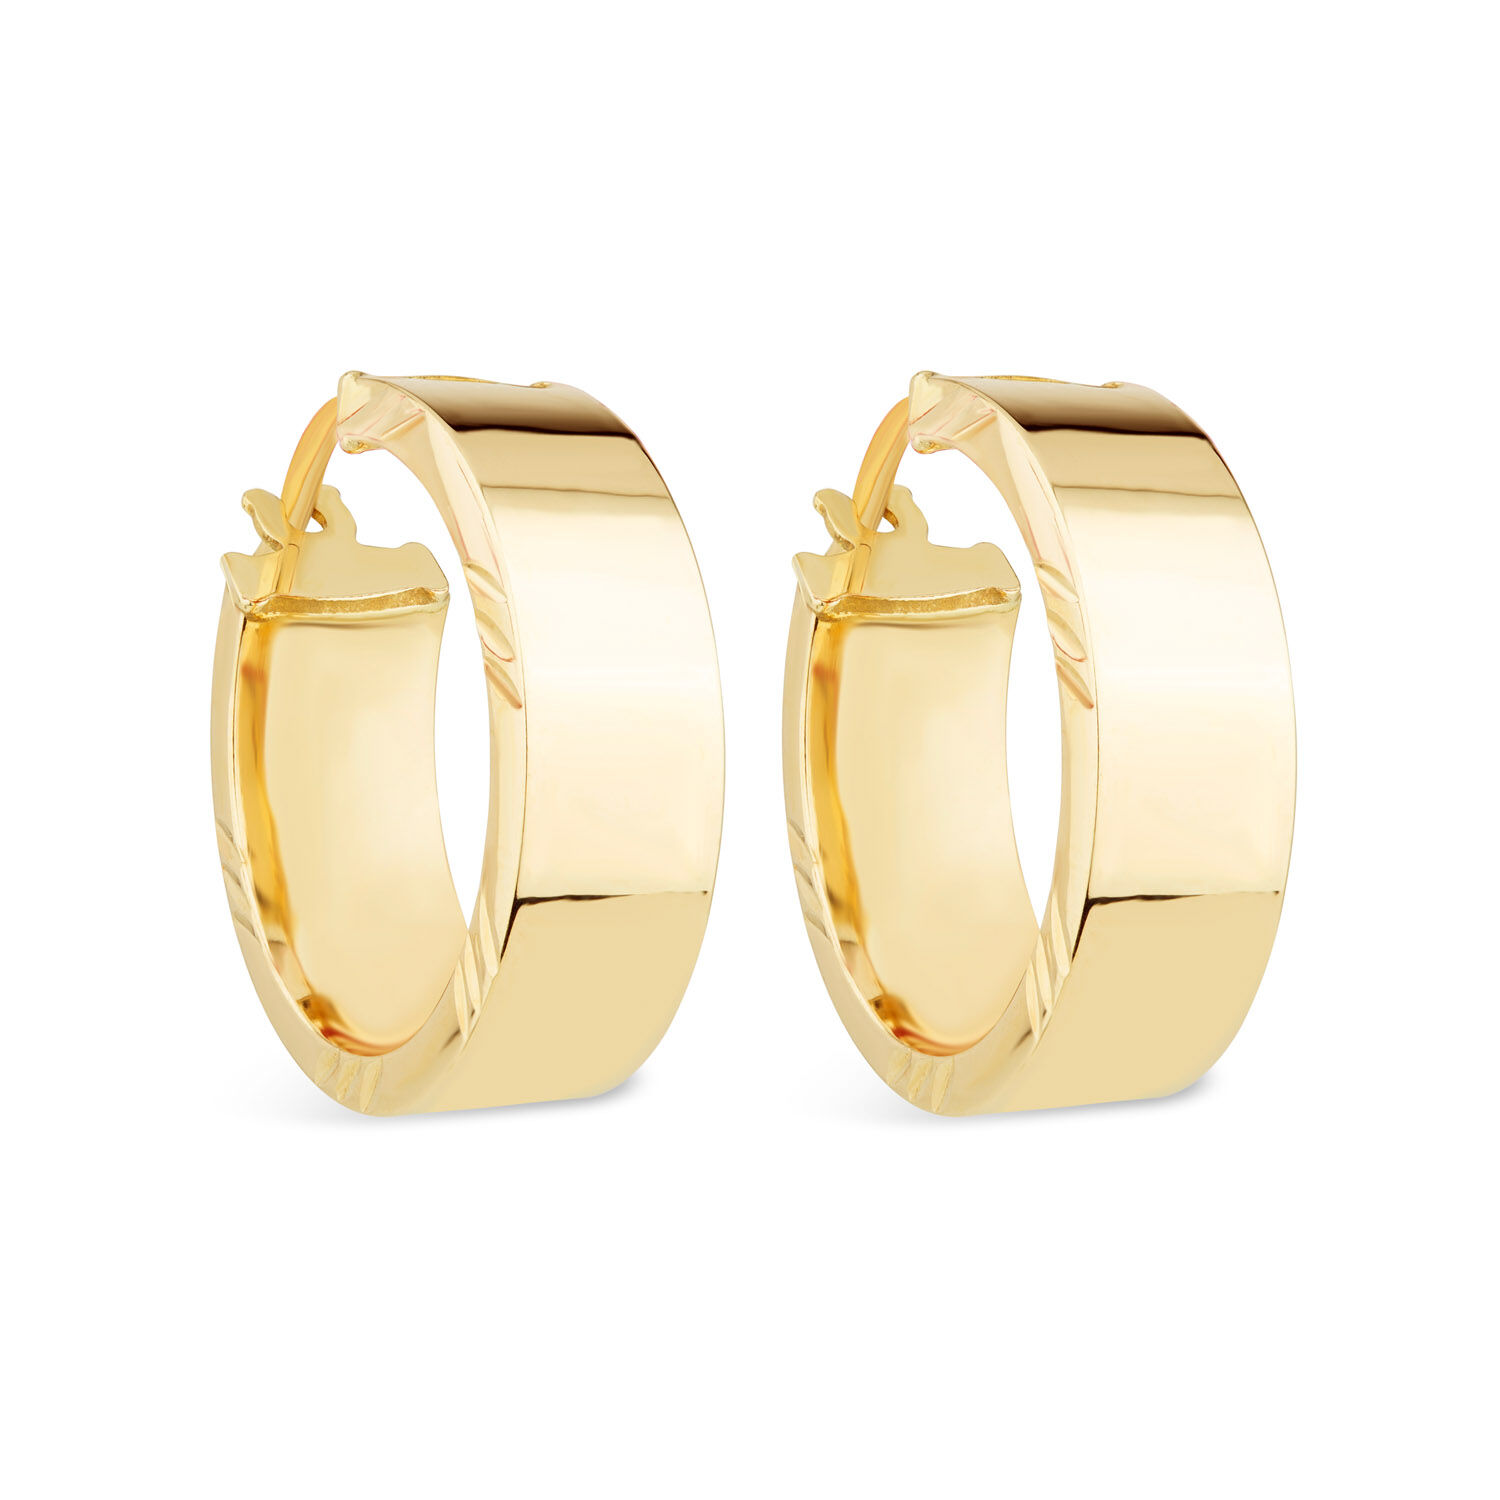 Citerna 9ct Original Gold Hoop Earrings for Women  Premium Quality Gold  Earrings for All Occasions  Versatile Gold Hoops with Top Tick Closure   Branded Box Included  Amazoncouk Fashion